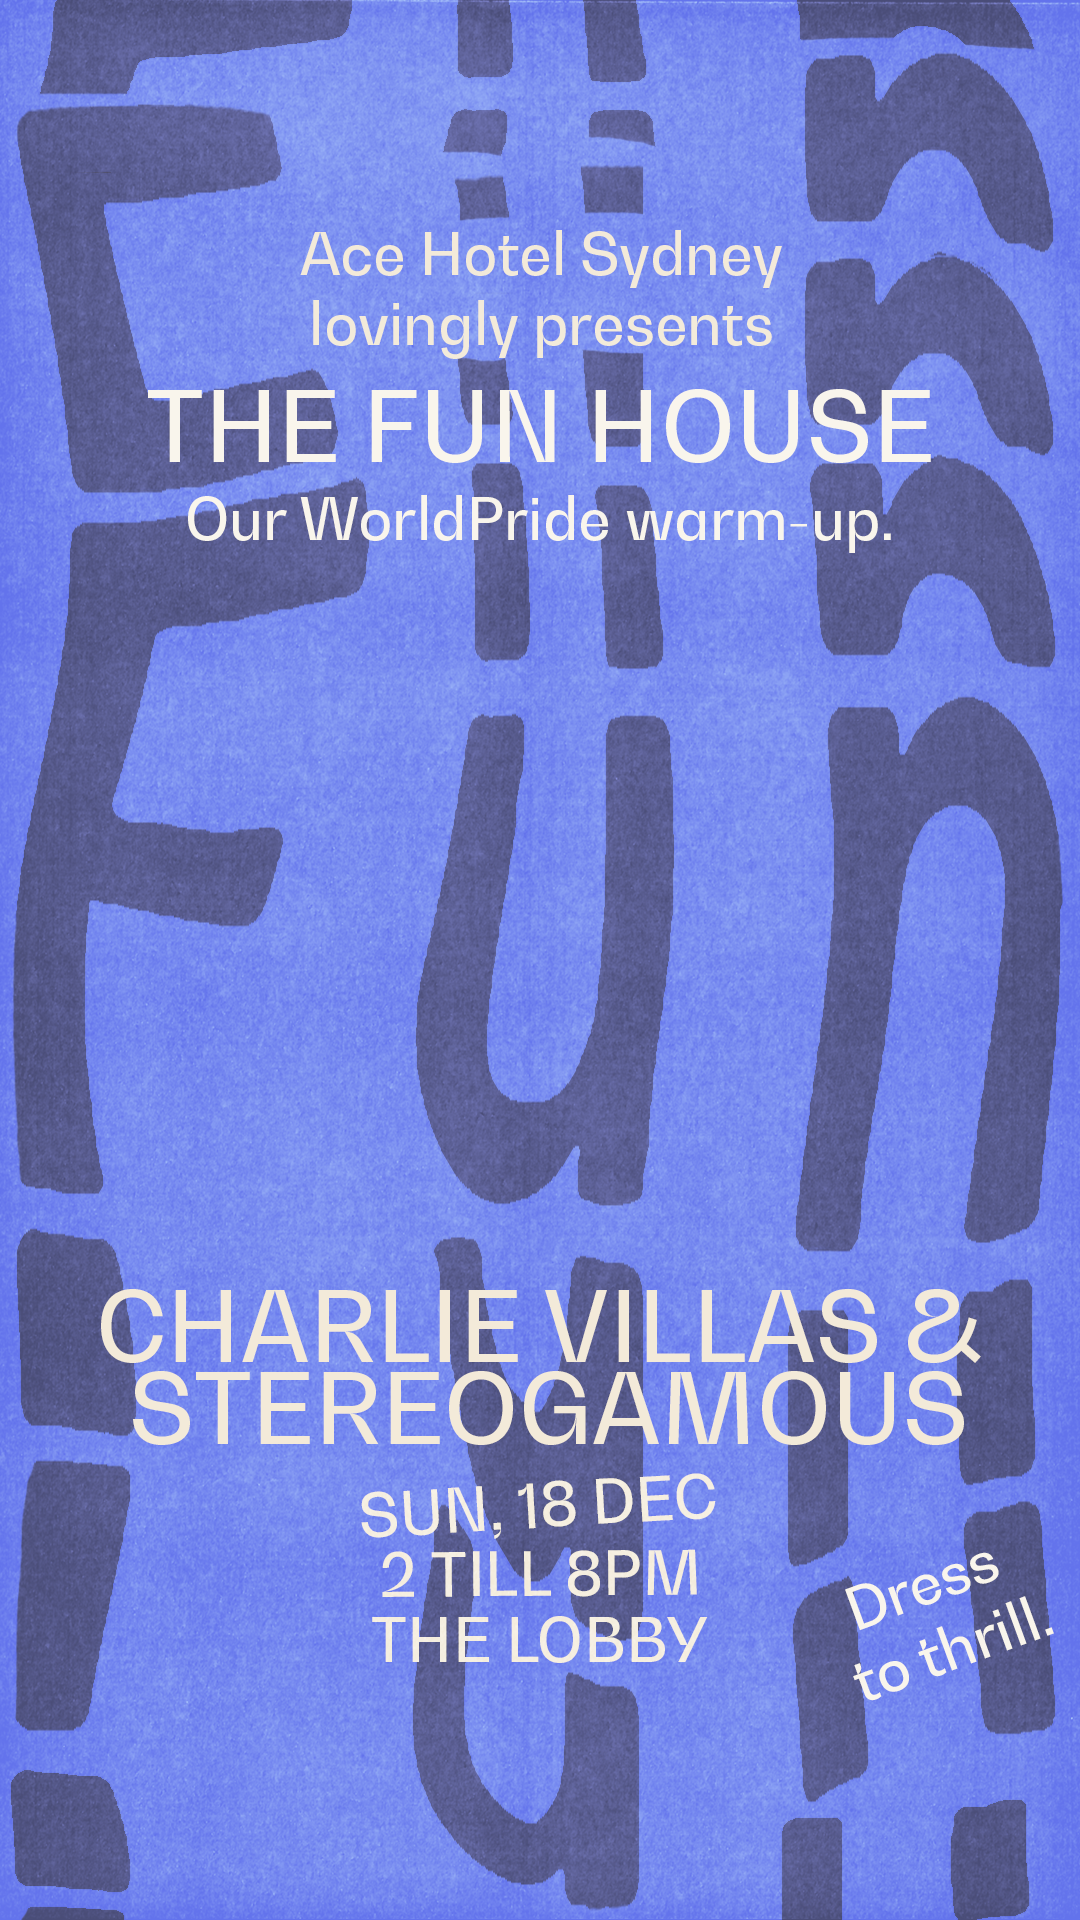 The Fun House with Charlie Villas and Stereogamous promo